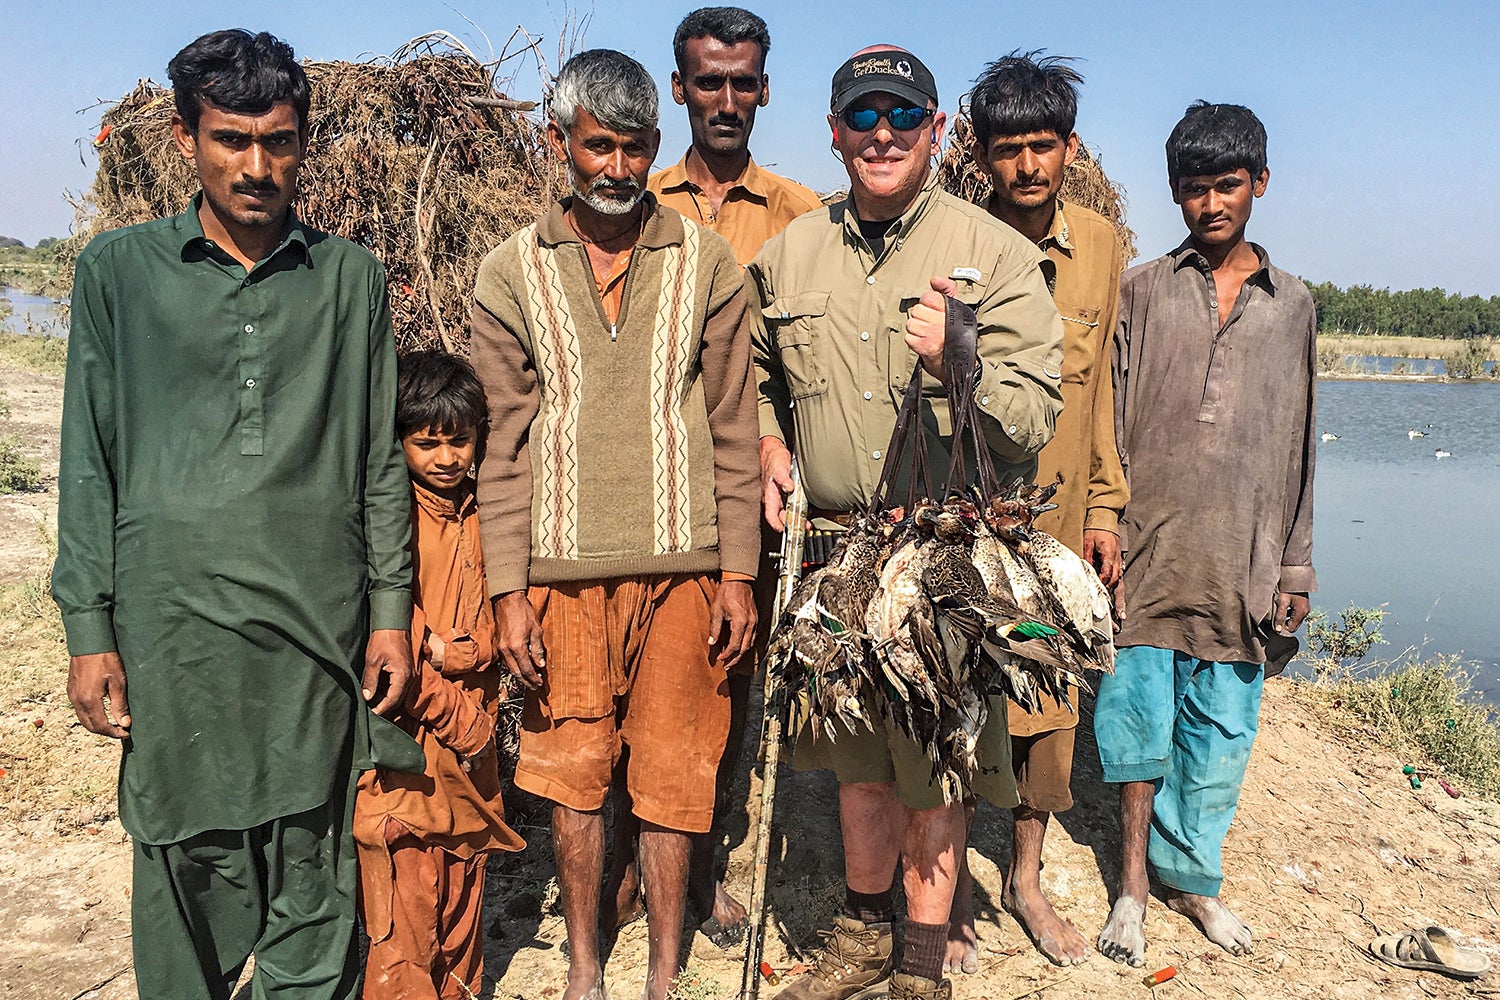 american duck hunter with many birds poses with guide staff in pakistan